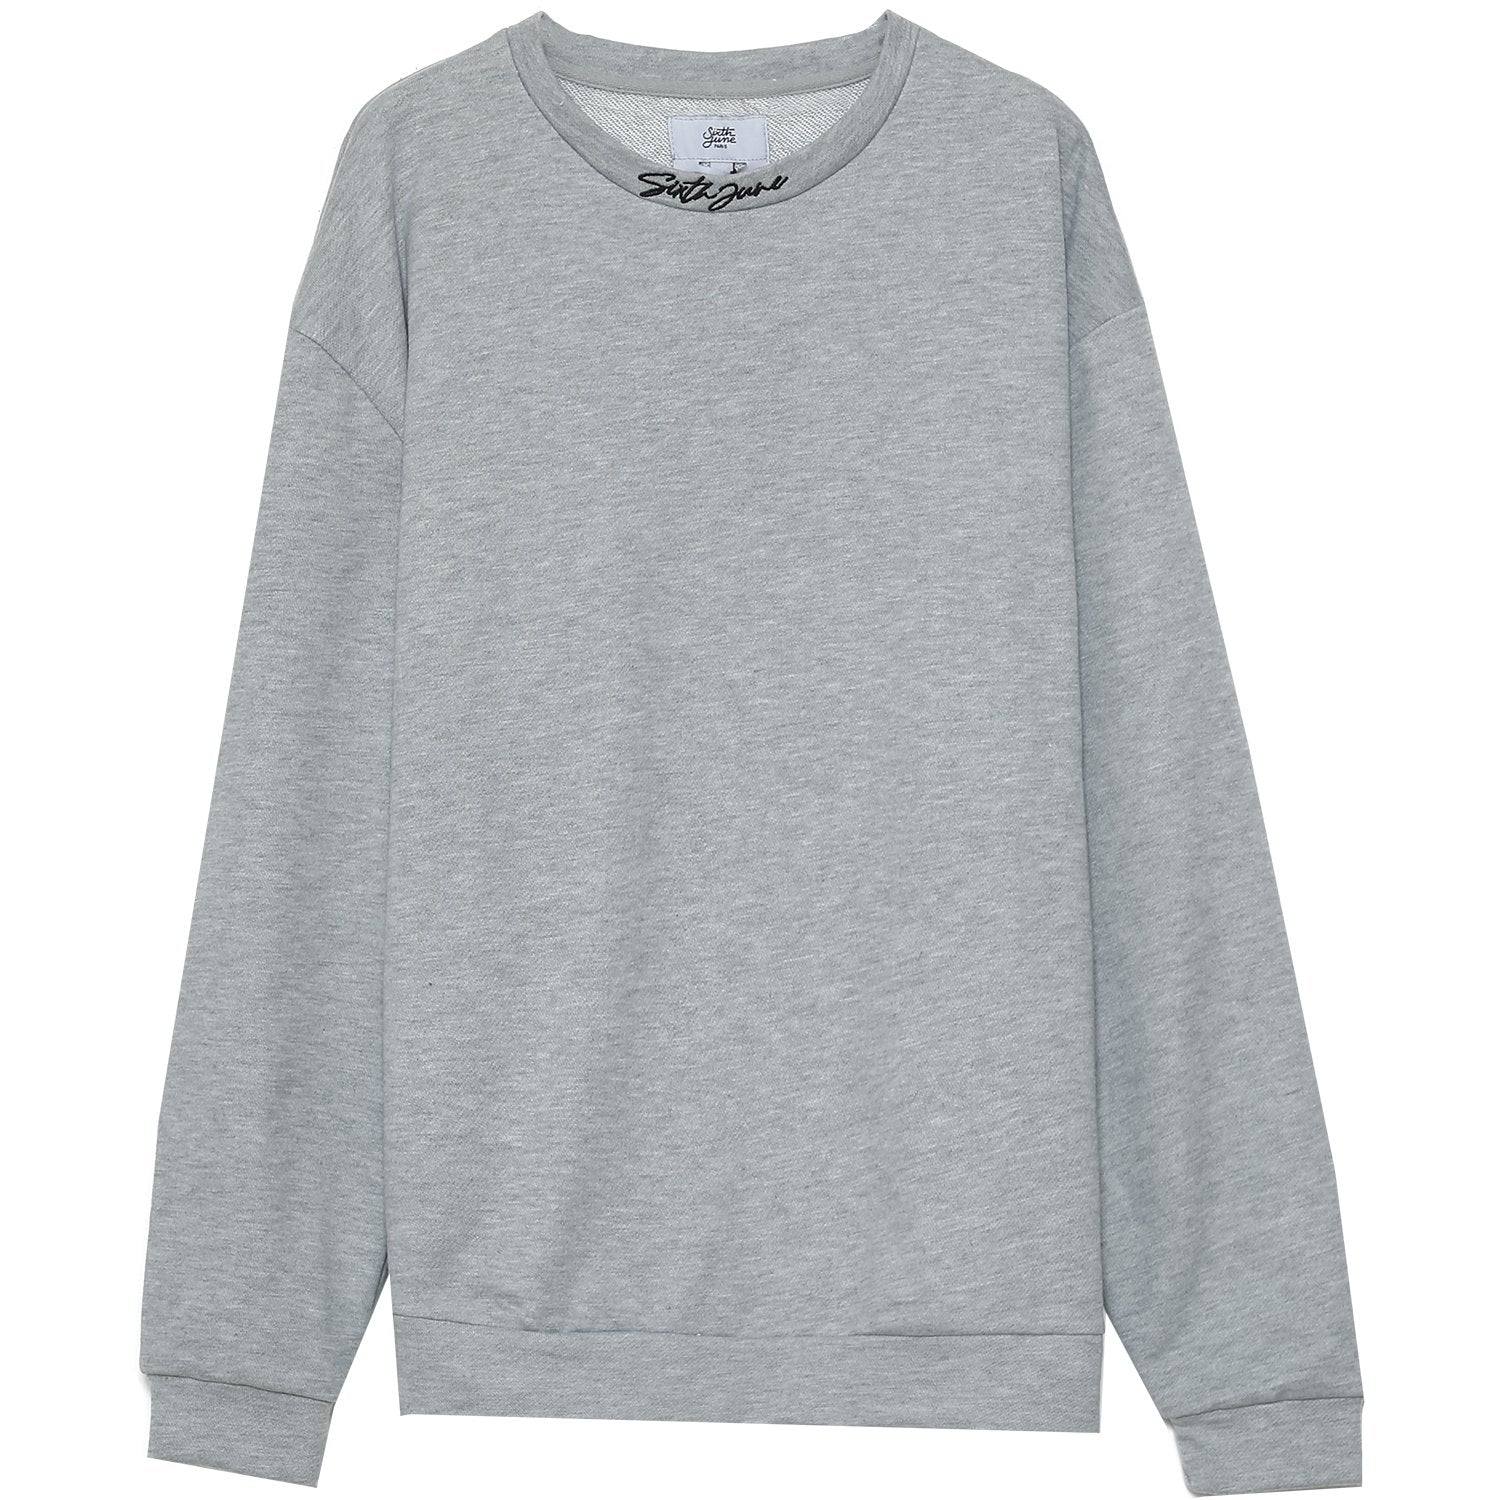 Youth Culture Matters sweater grey